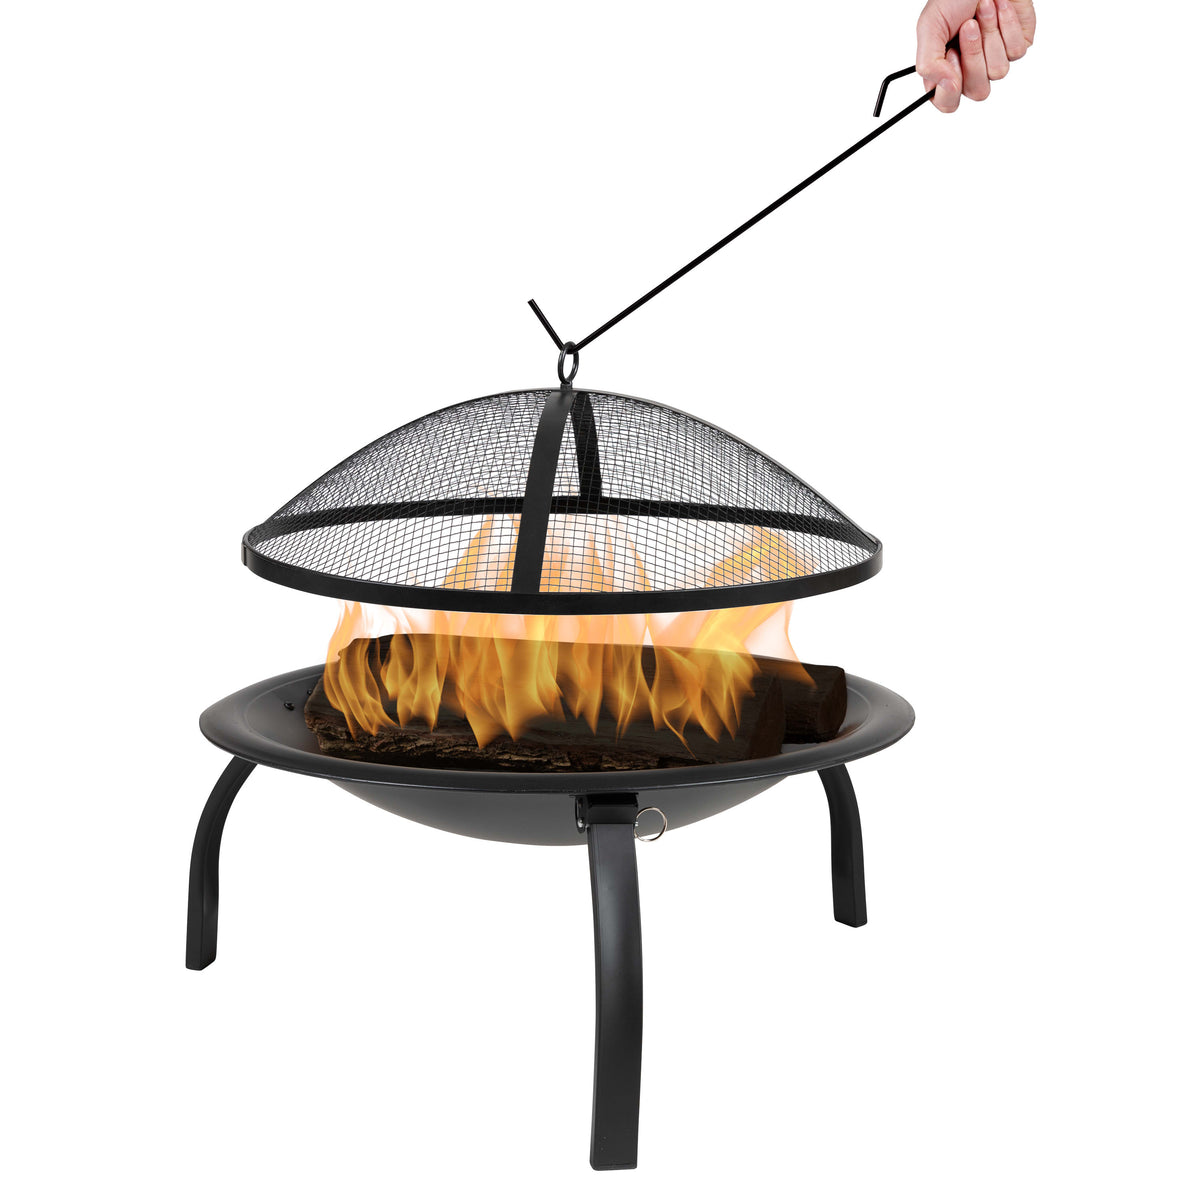 22.5inch Foldable Outdoor Wood Burning Portable Firepit-Mesh Spark screen and Poker